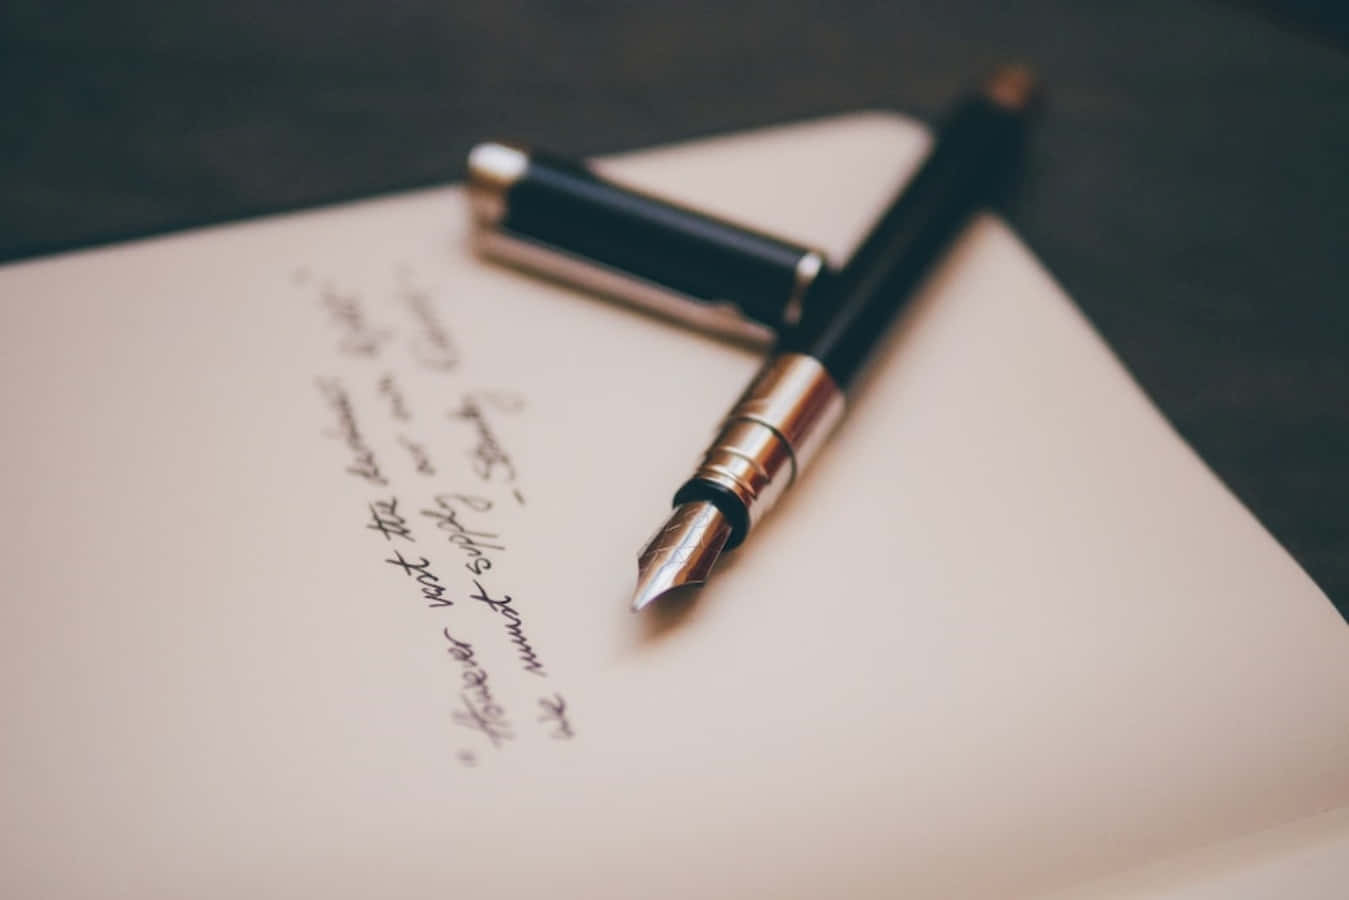 A Fountain Pen And A Notebook On A Table